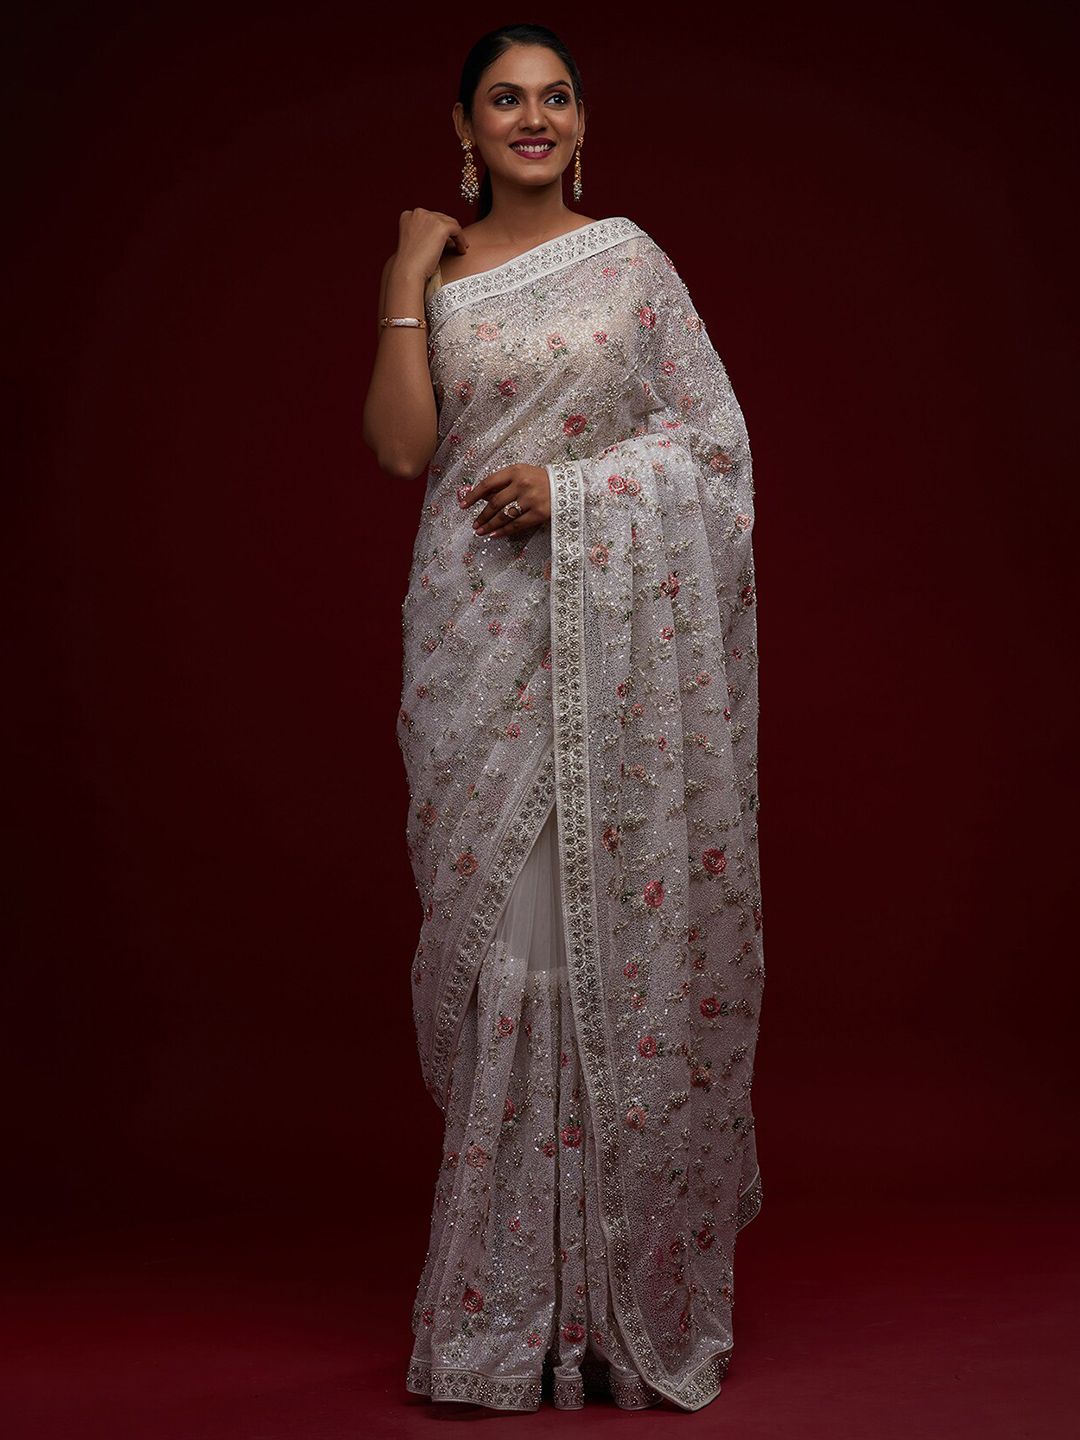 Koskii White & Pink Embellished Beads and Stones Supernet Saree Price in India